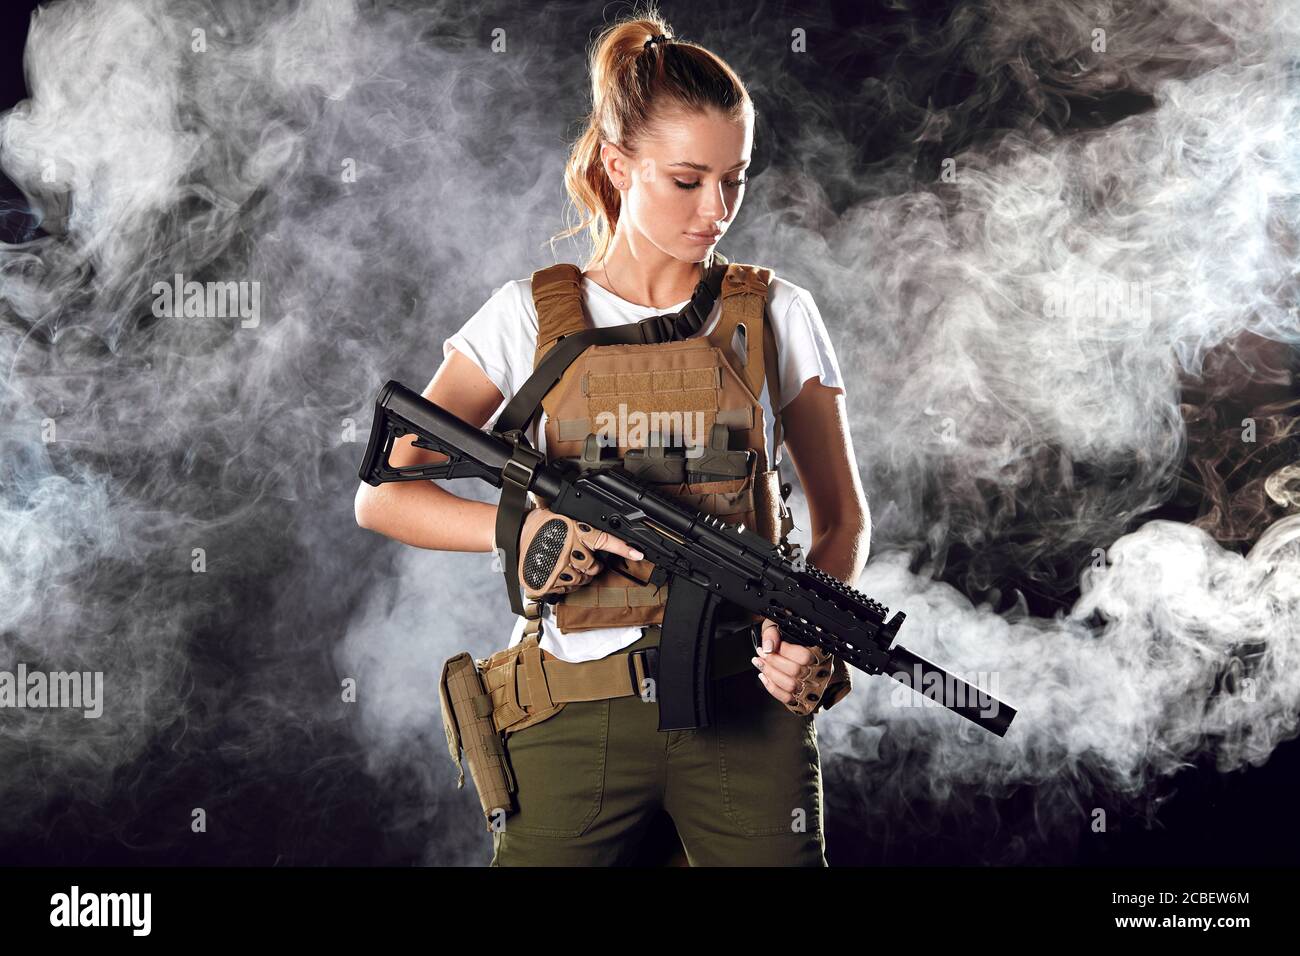 Young blonde female snipper in military outfit with assault rifle in studio on smoky dark background. Women in military service concept. Stock Photo